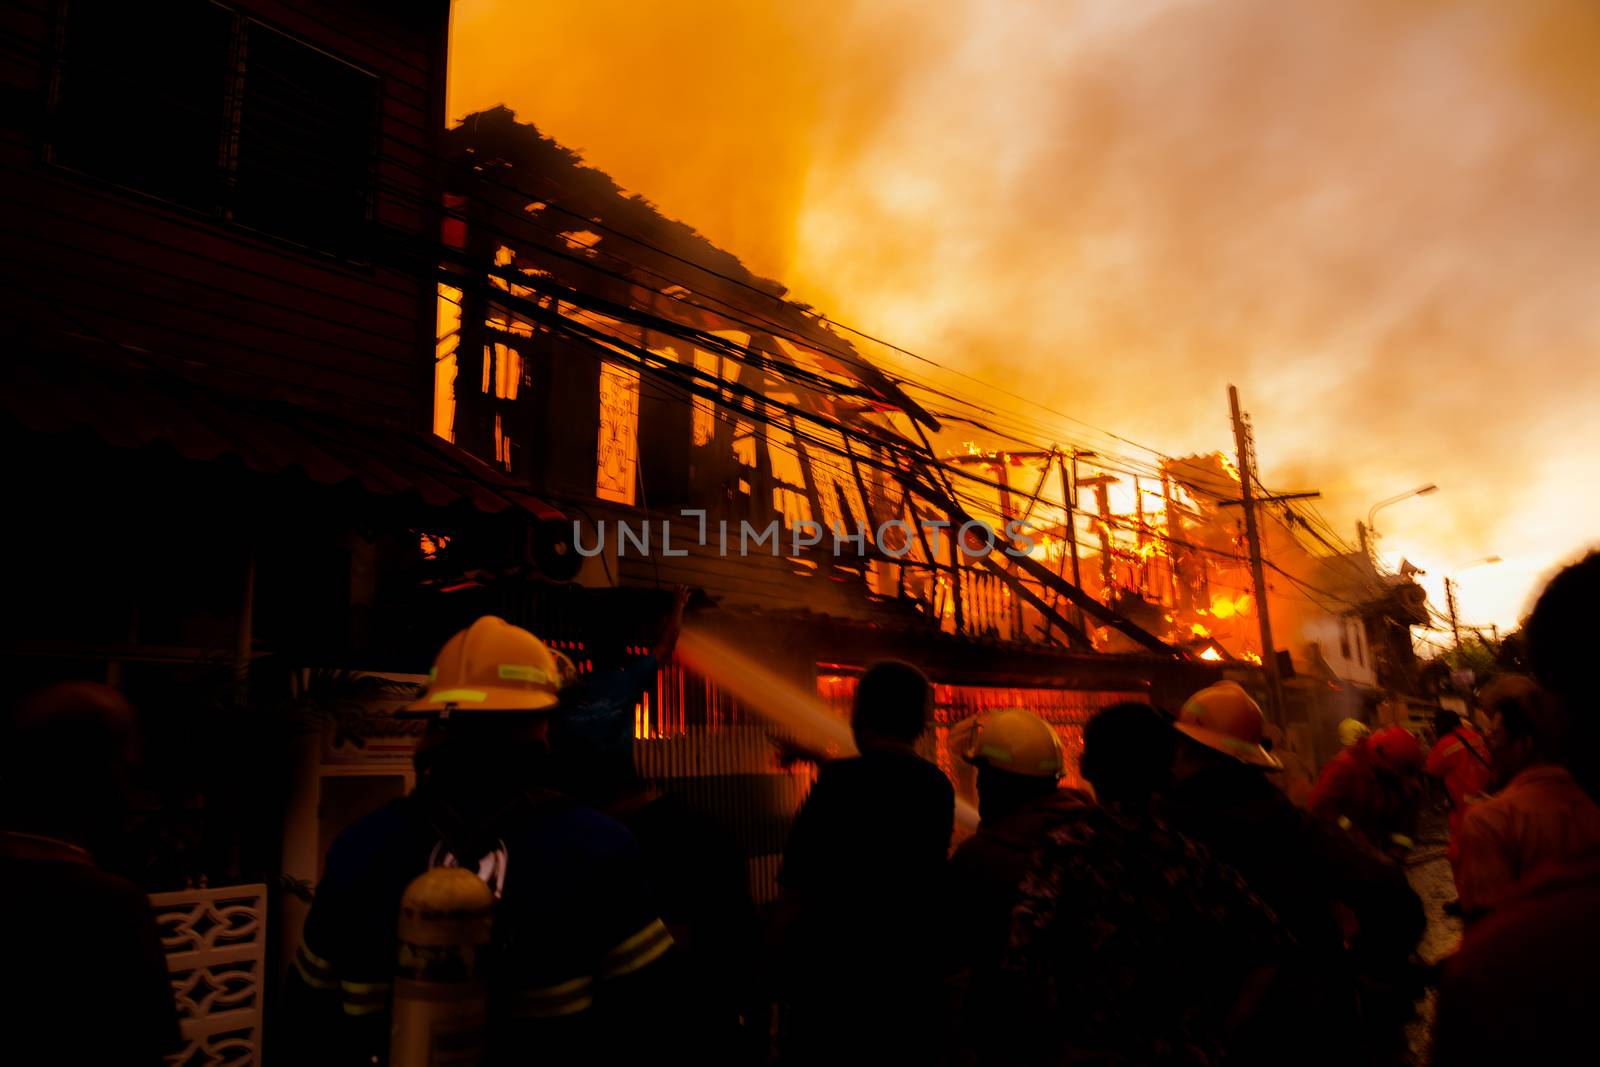 The silhouette of Burning house, House on fire